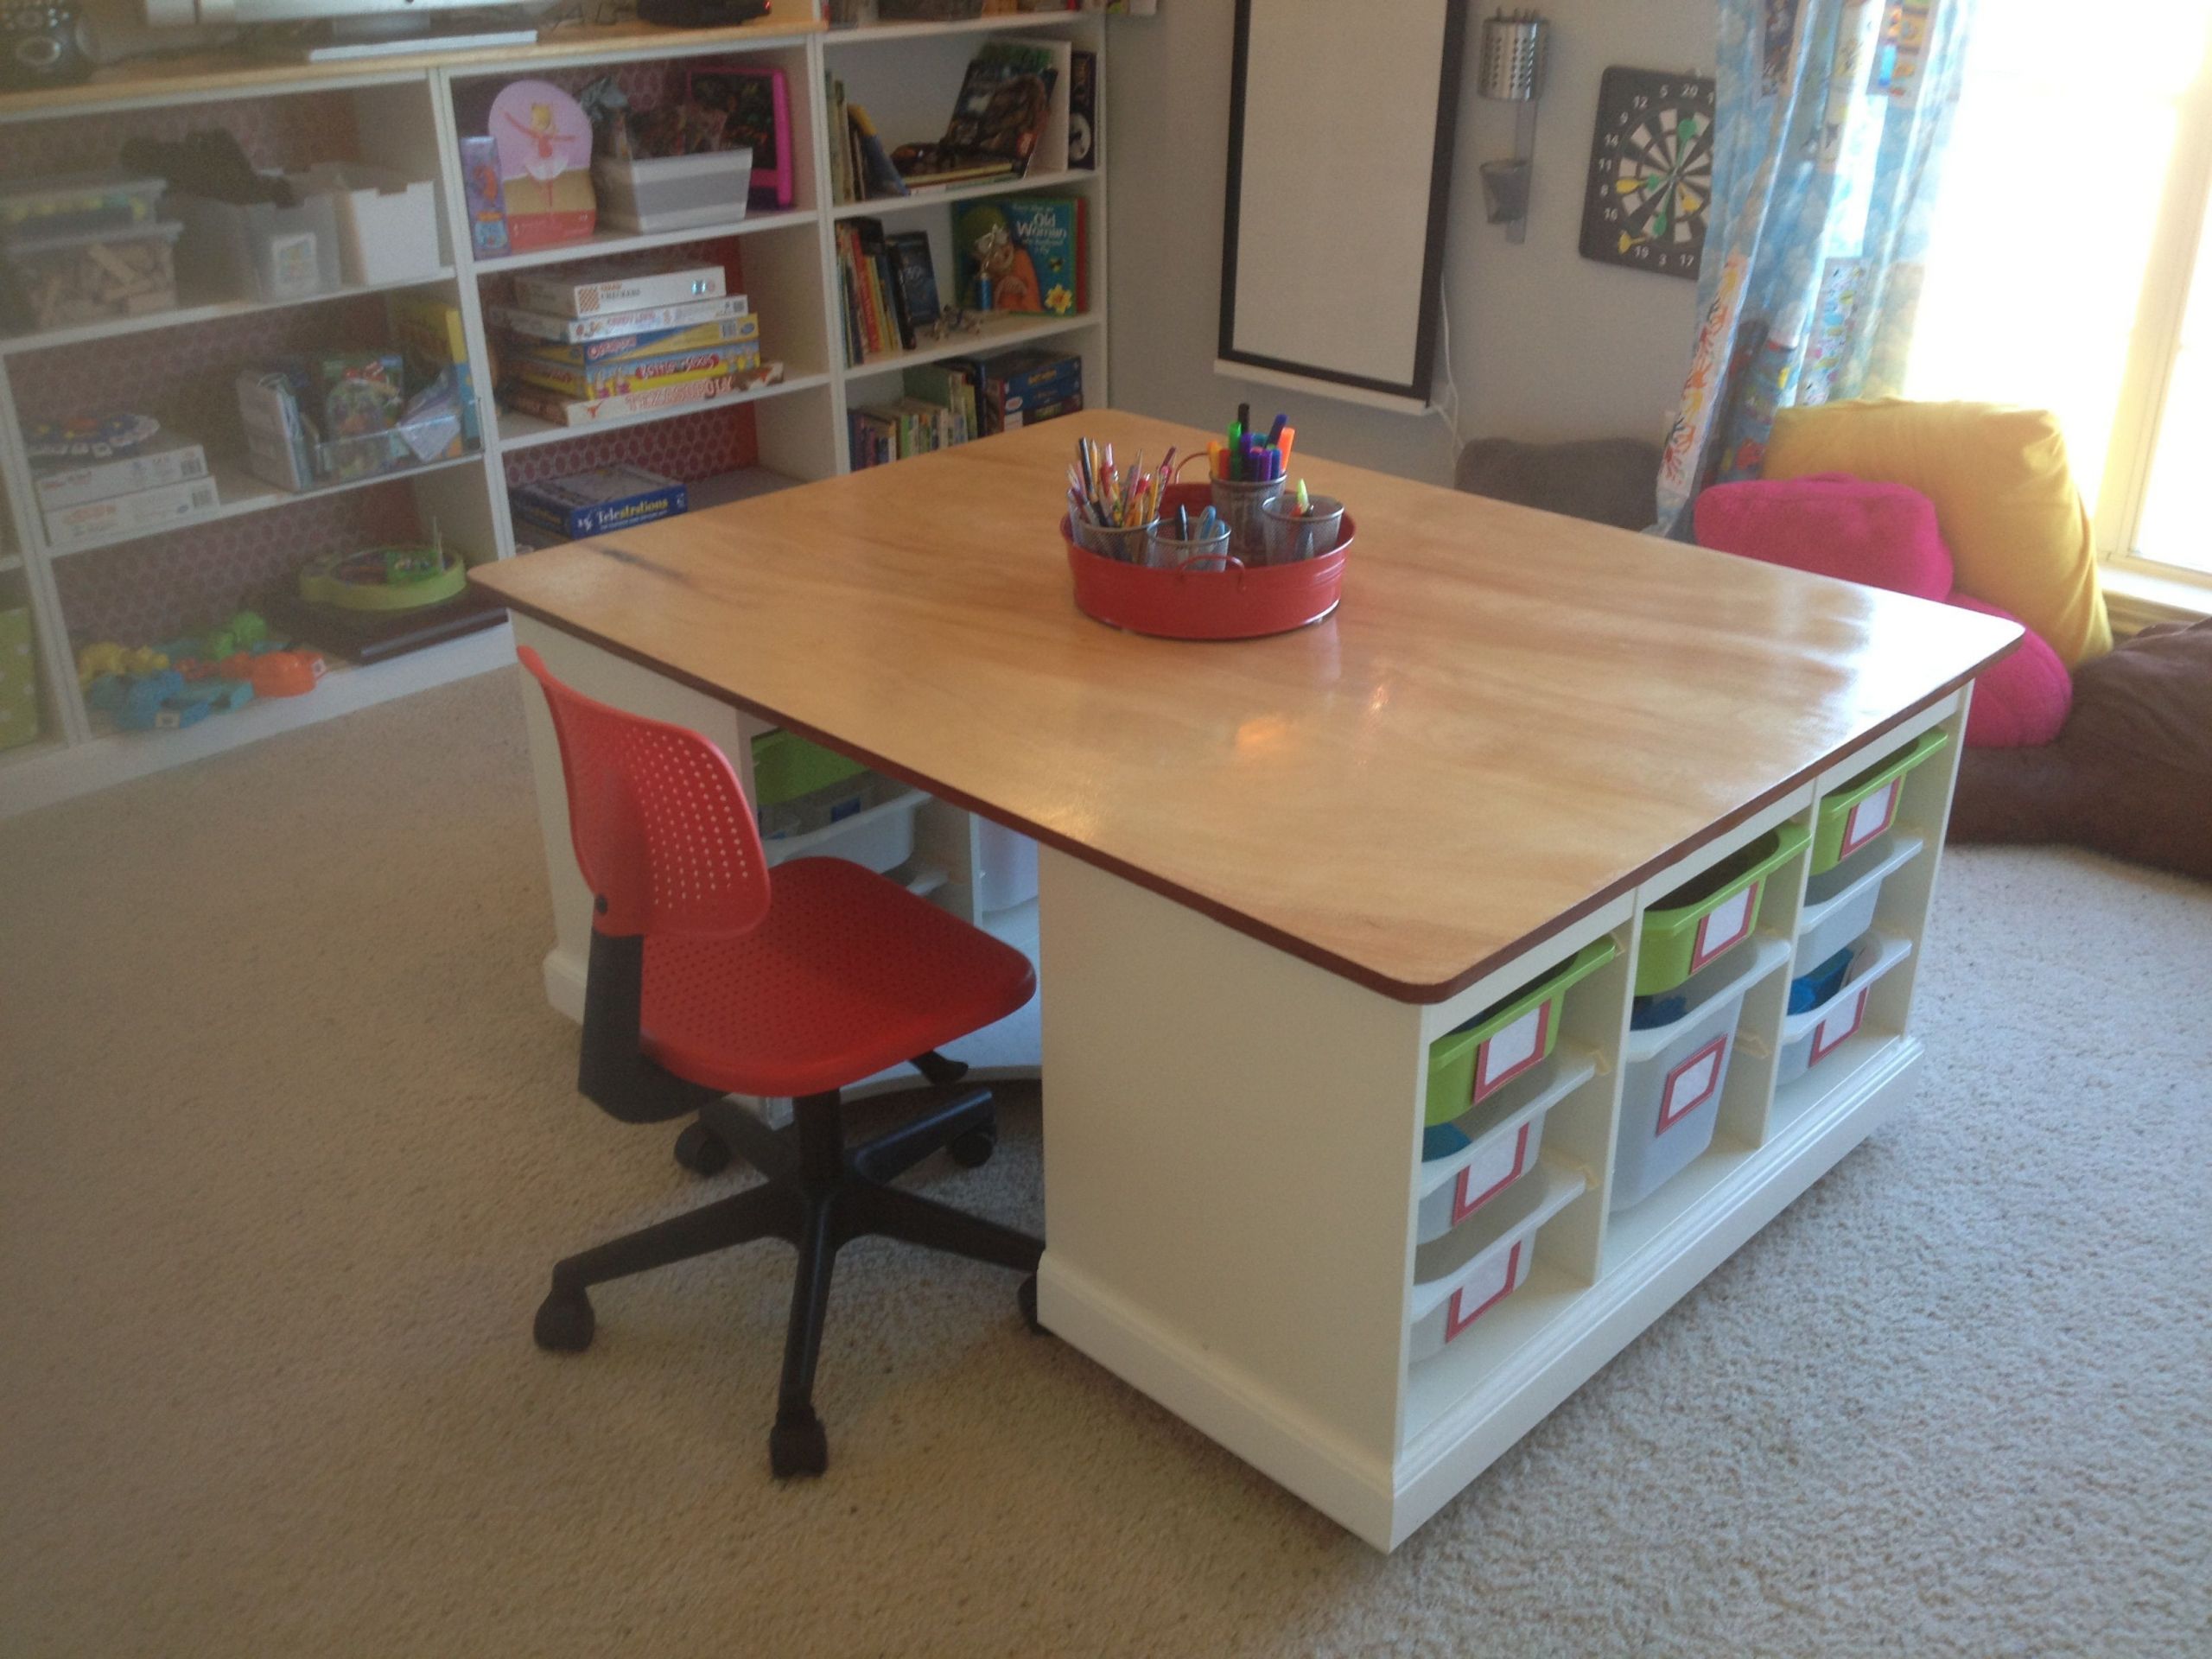 Kids Art Table With Storage
 Finished Kids craft board game Lego table in the kids